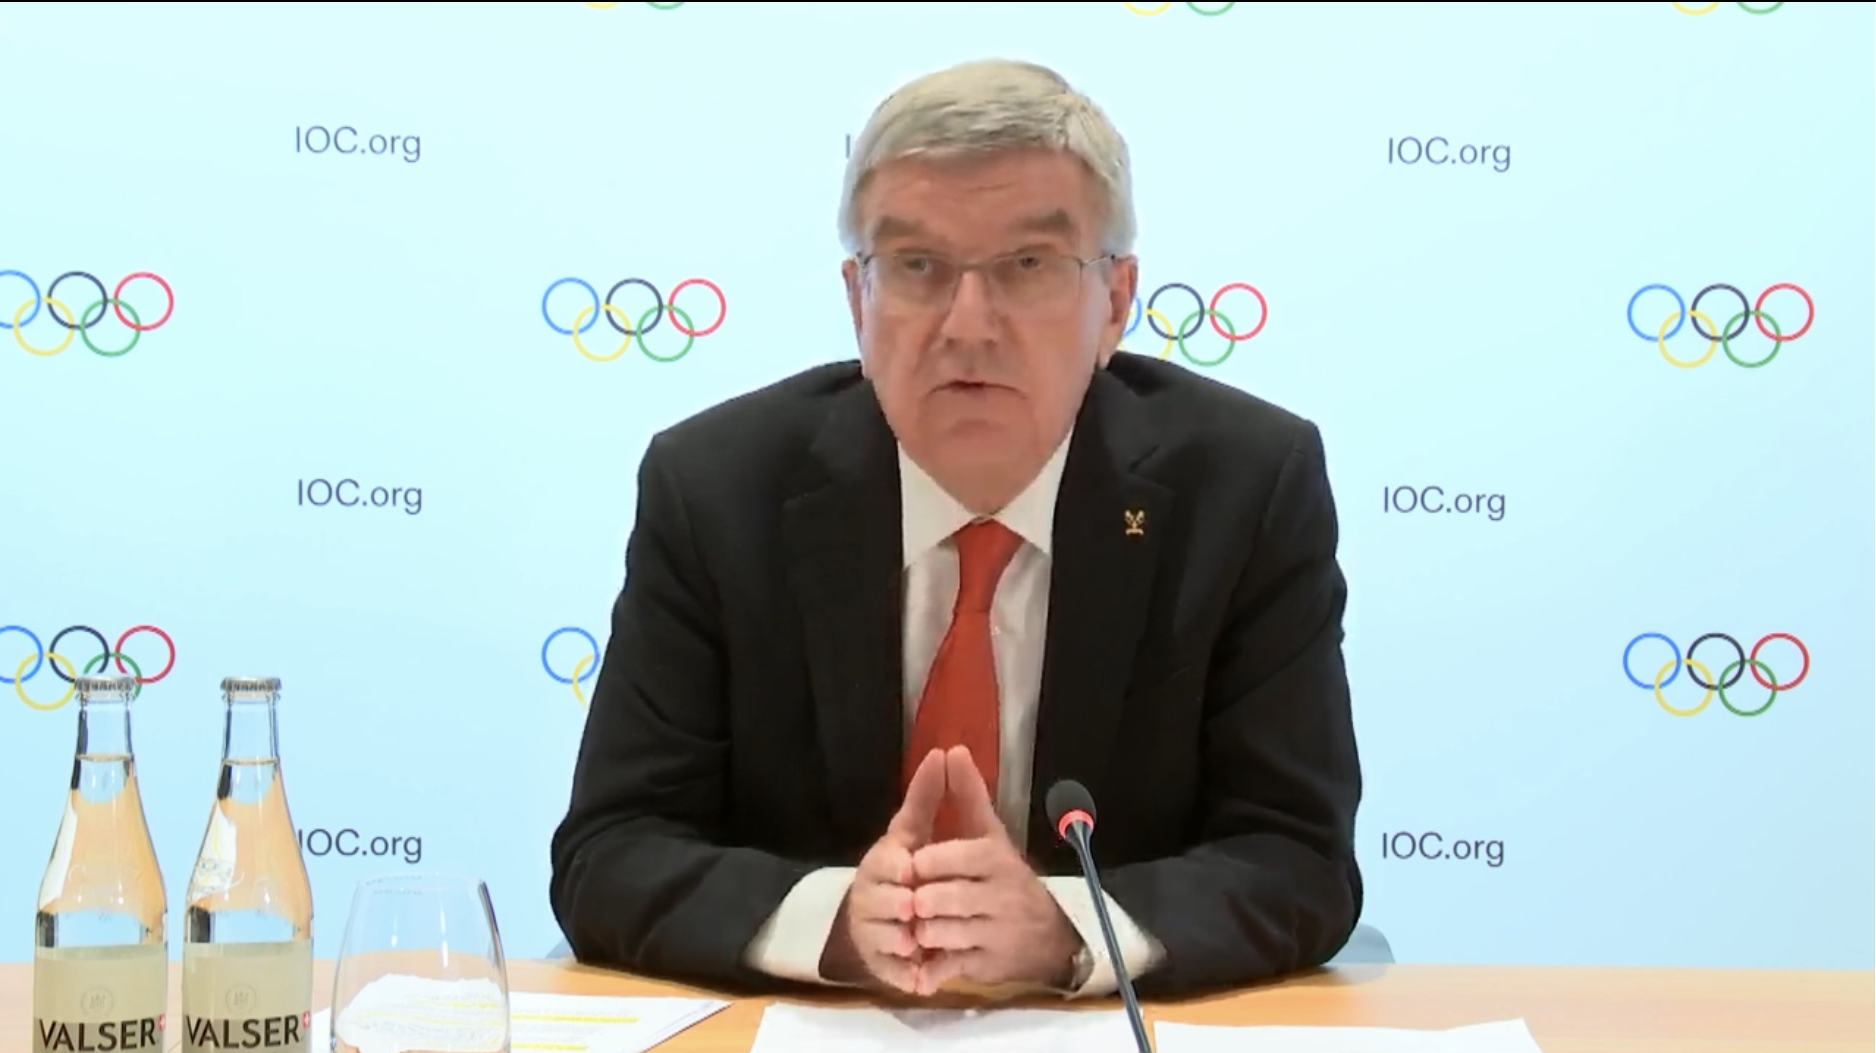 Thomas Bach's comments following an IOC Executive Board meeting that the organisation would continue to monitor boxing's governance drew a stinging response from the IBA ©ITG